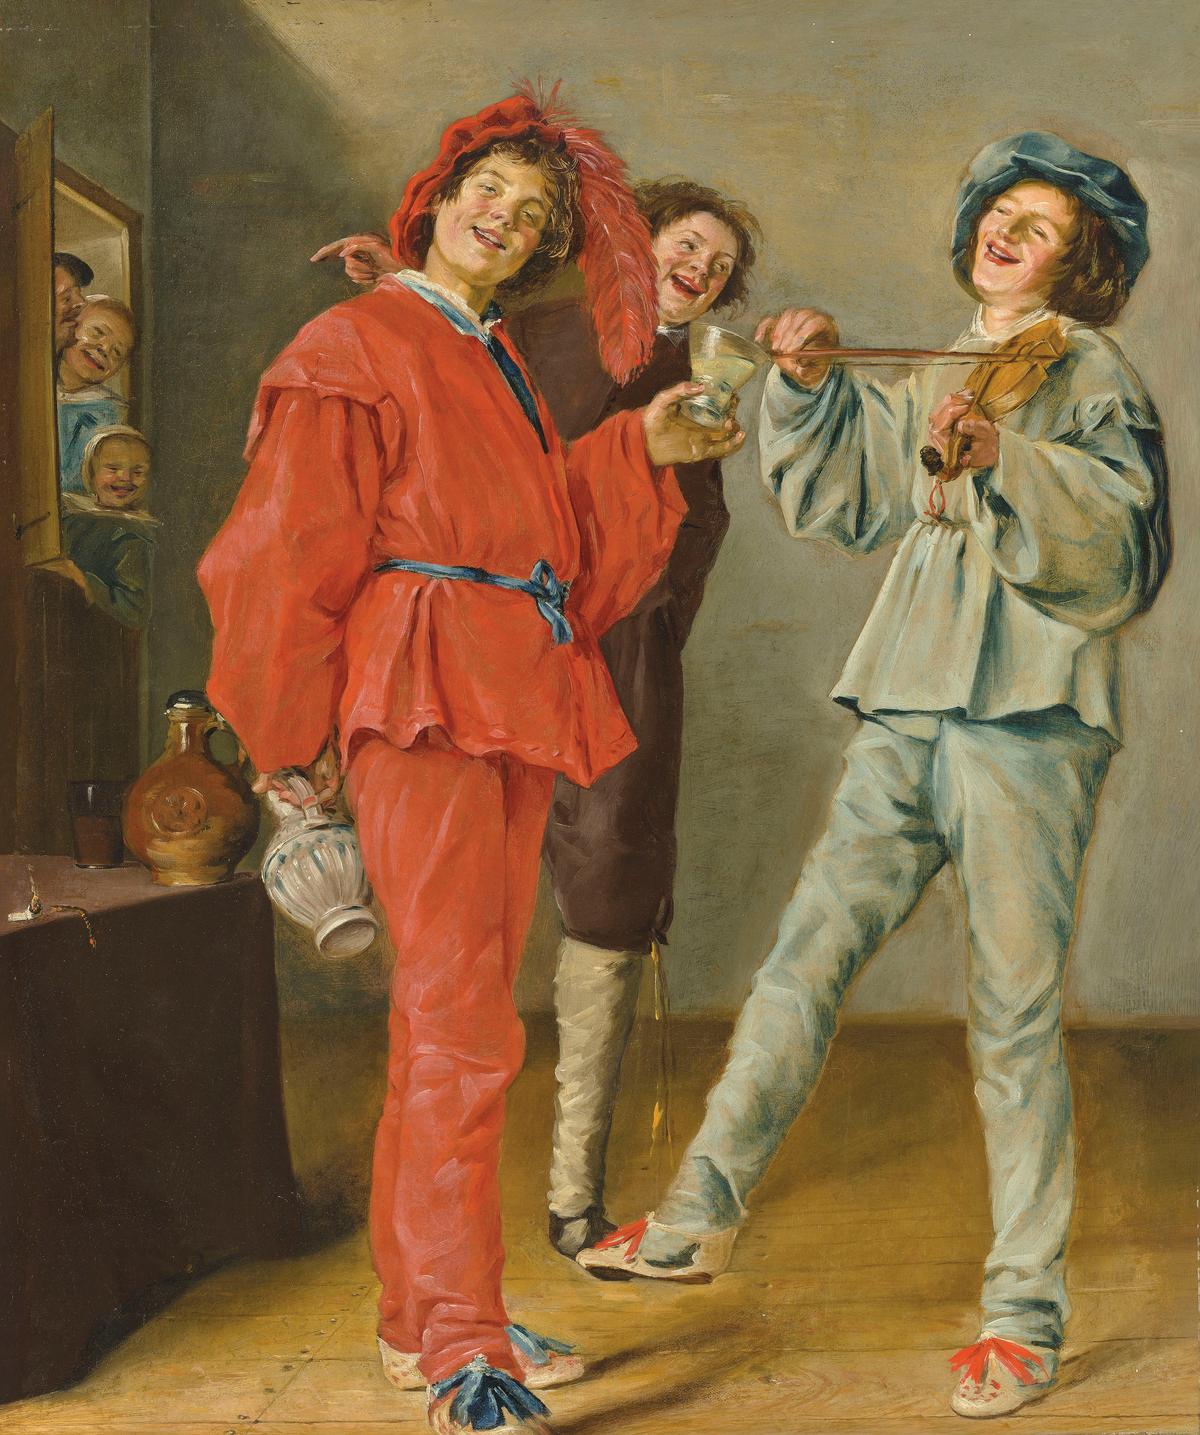 "Merry Company" (also called "Merry Trio"), between 1629–1631, by Judith Leyster. Oil on canvas; 28 1/3 inches by 23 2/3 inches. Private collection. (Public Domain)